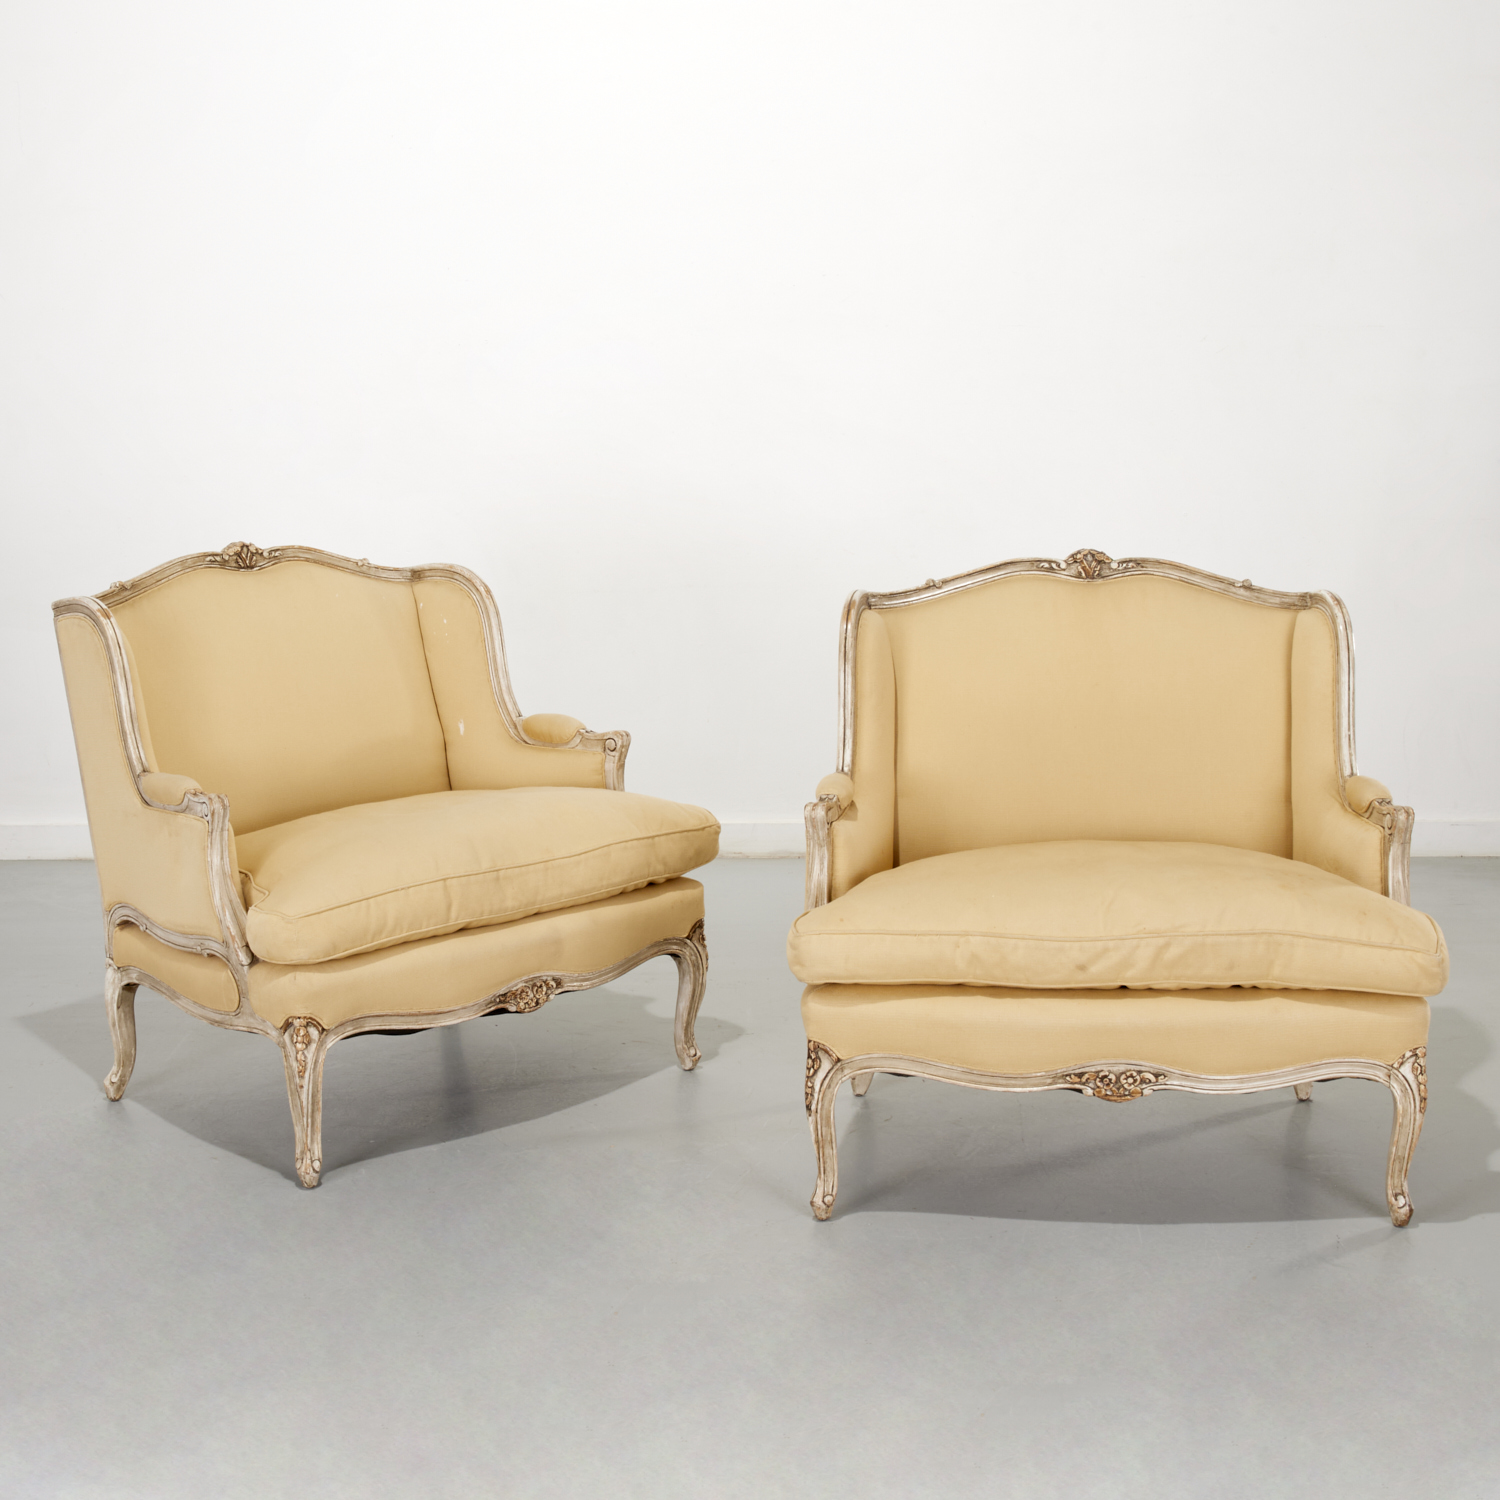 PAIR LOUIS XV STYLE PAINTED BERGERE 3ce58e